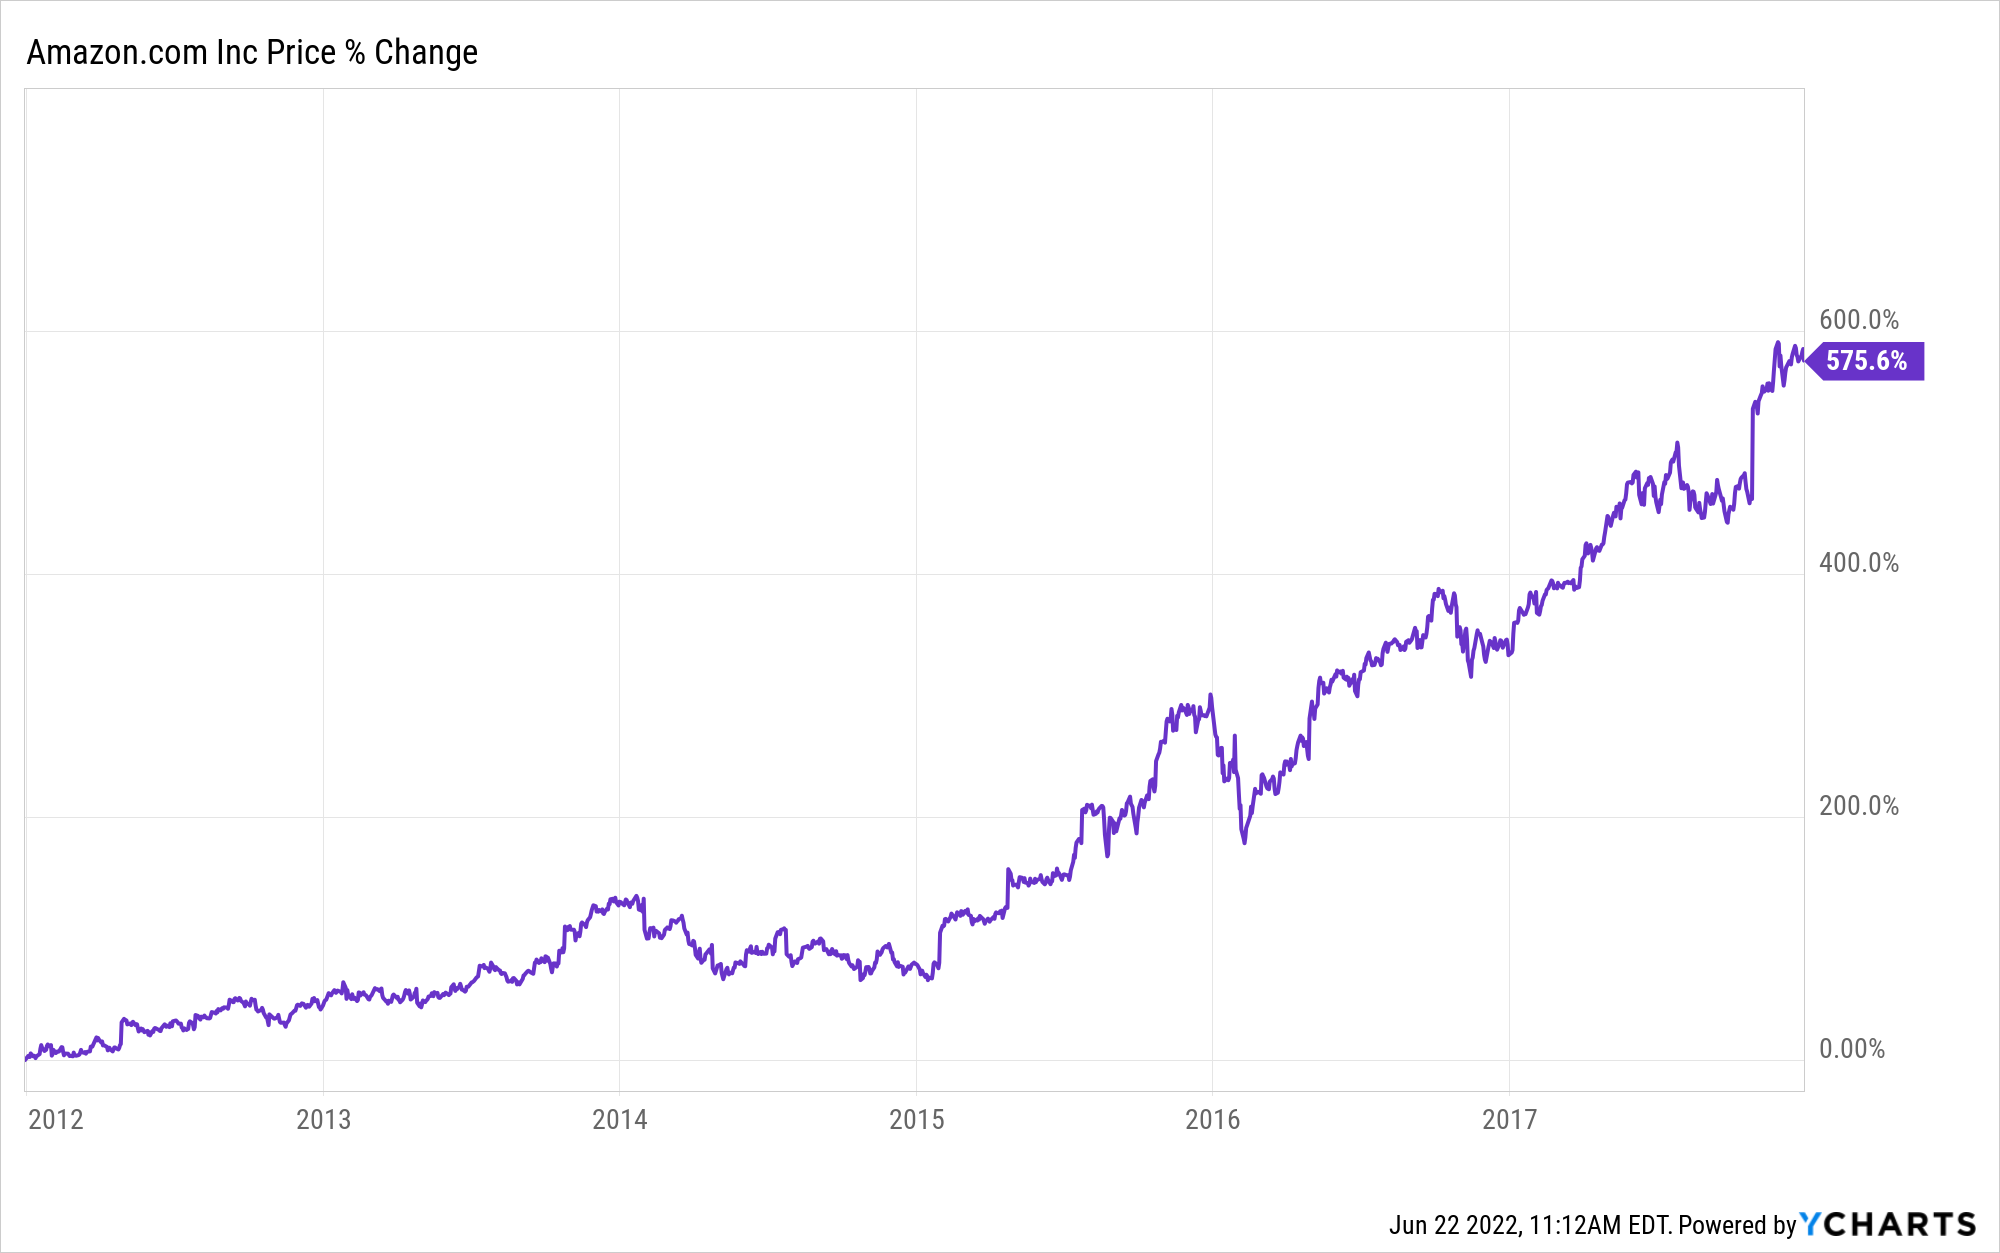 A graph depicting the change in Amazon stock price between 2012 and 2018